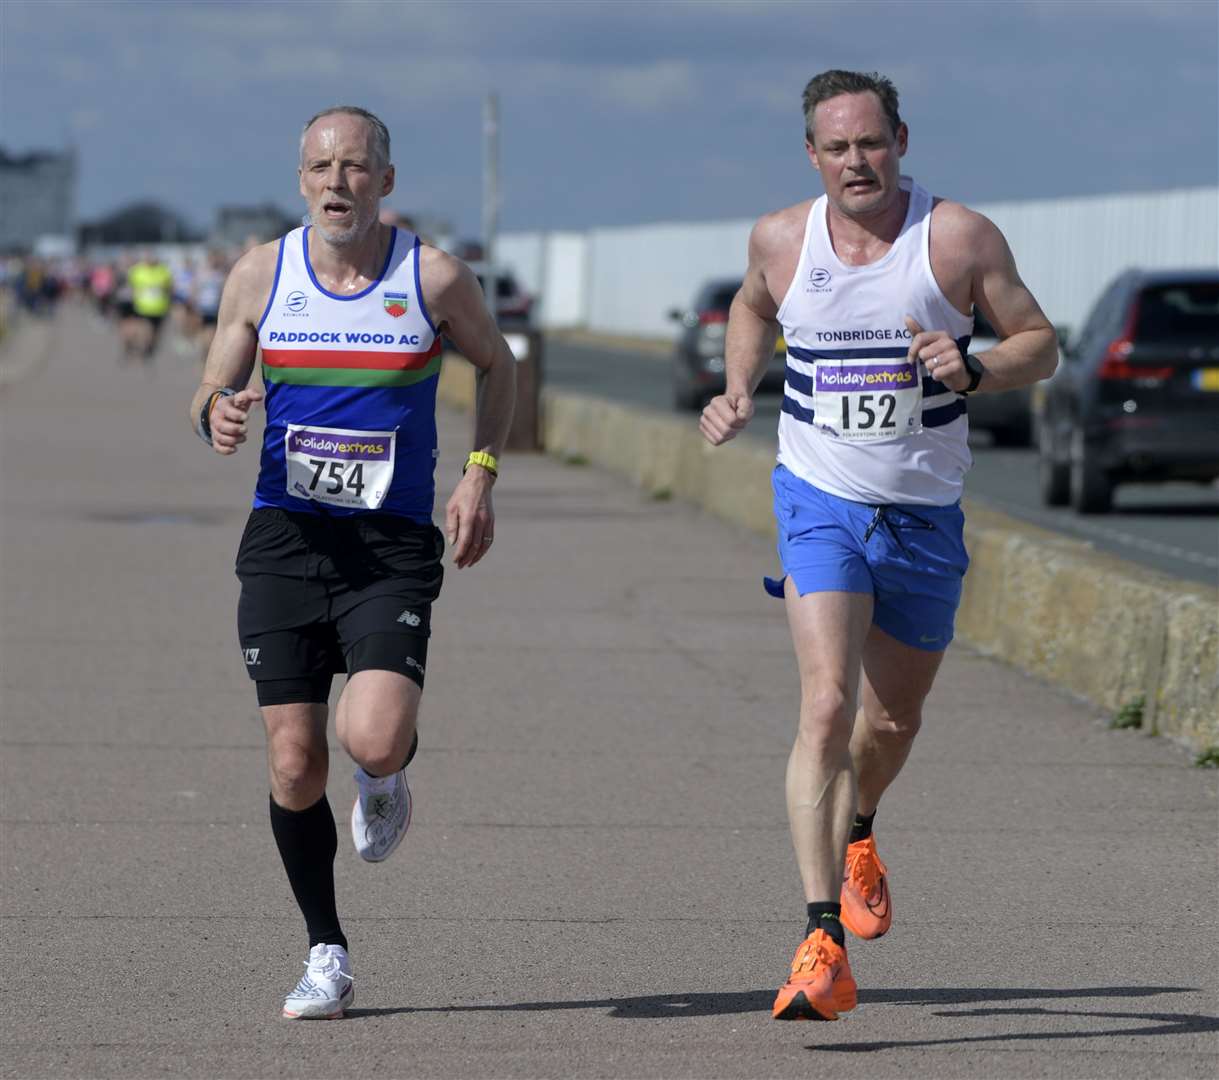 No.754 Steve Wright of Paddock Wood AC and No.152 Anthony Crush for Tonbridge AC. Picture: Barry Goodwin (63469071)